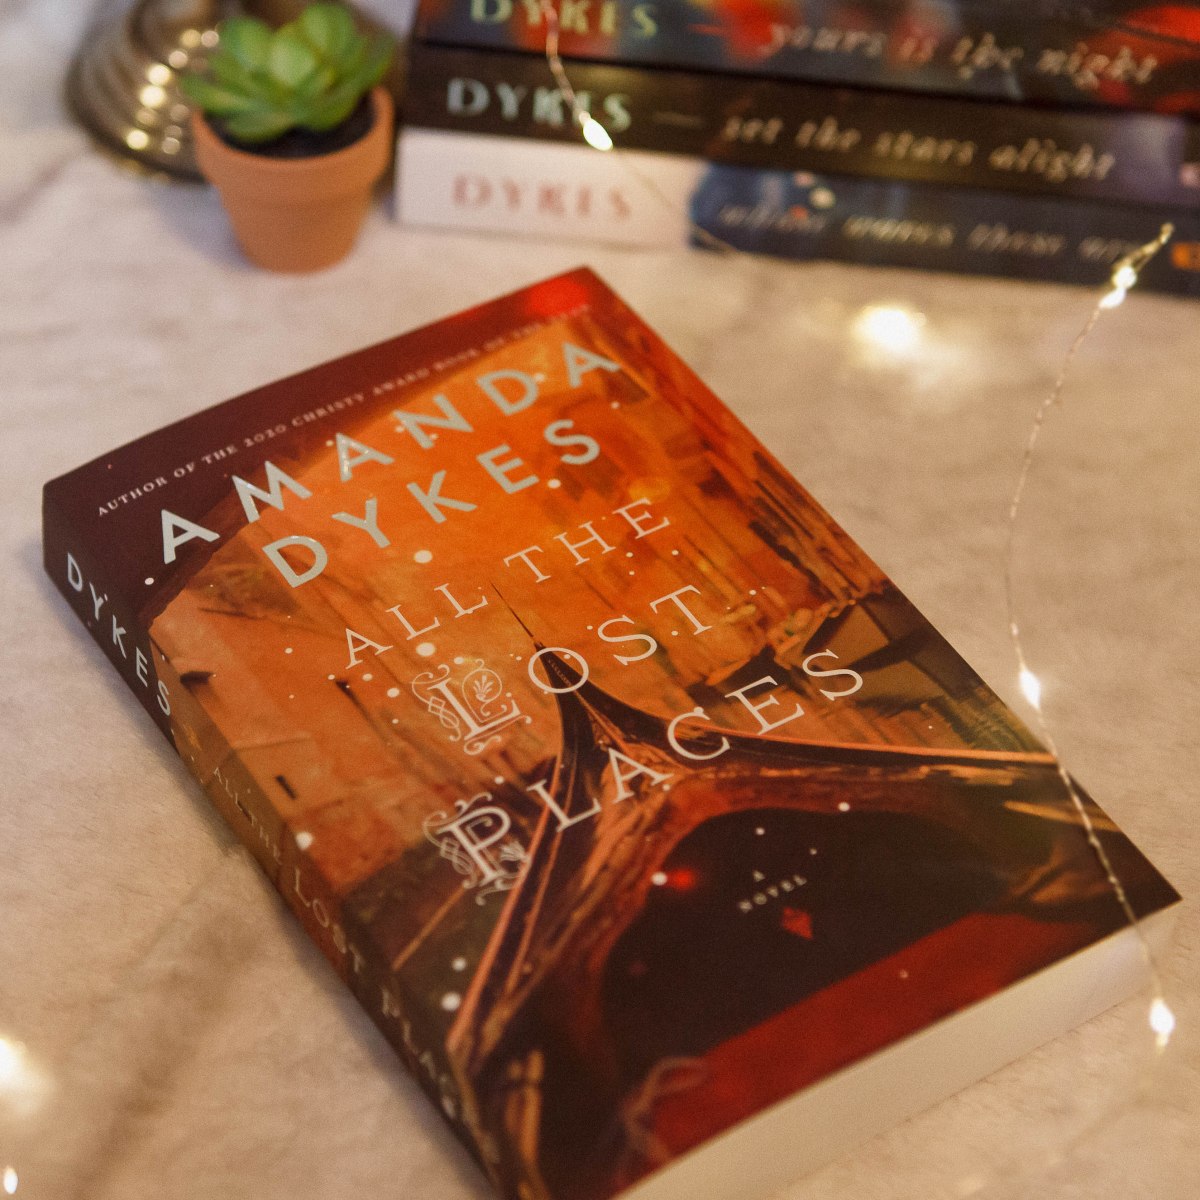 All the Lost Places by Amanda Dykes